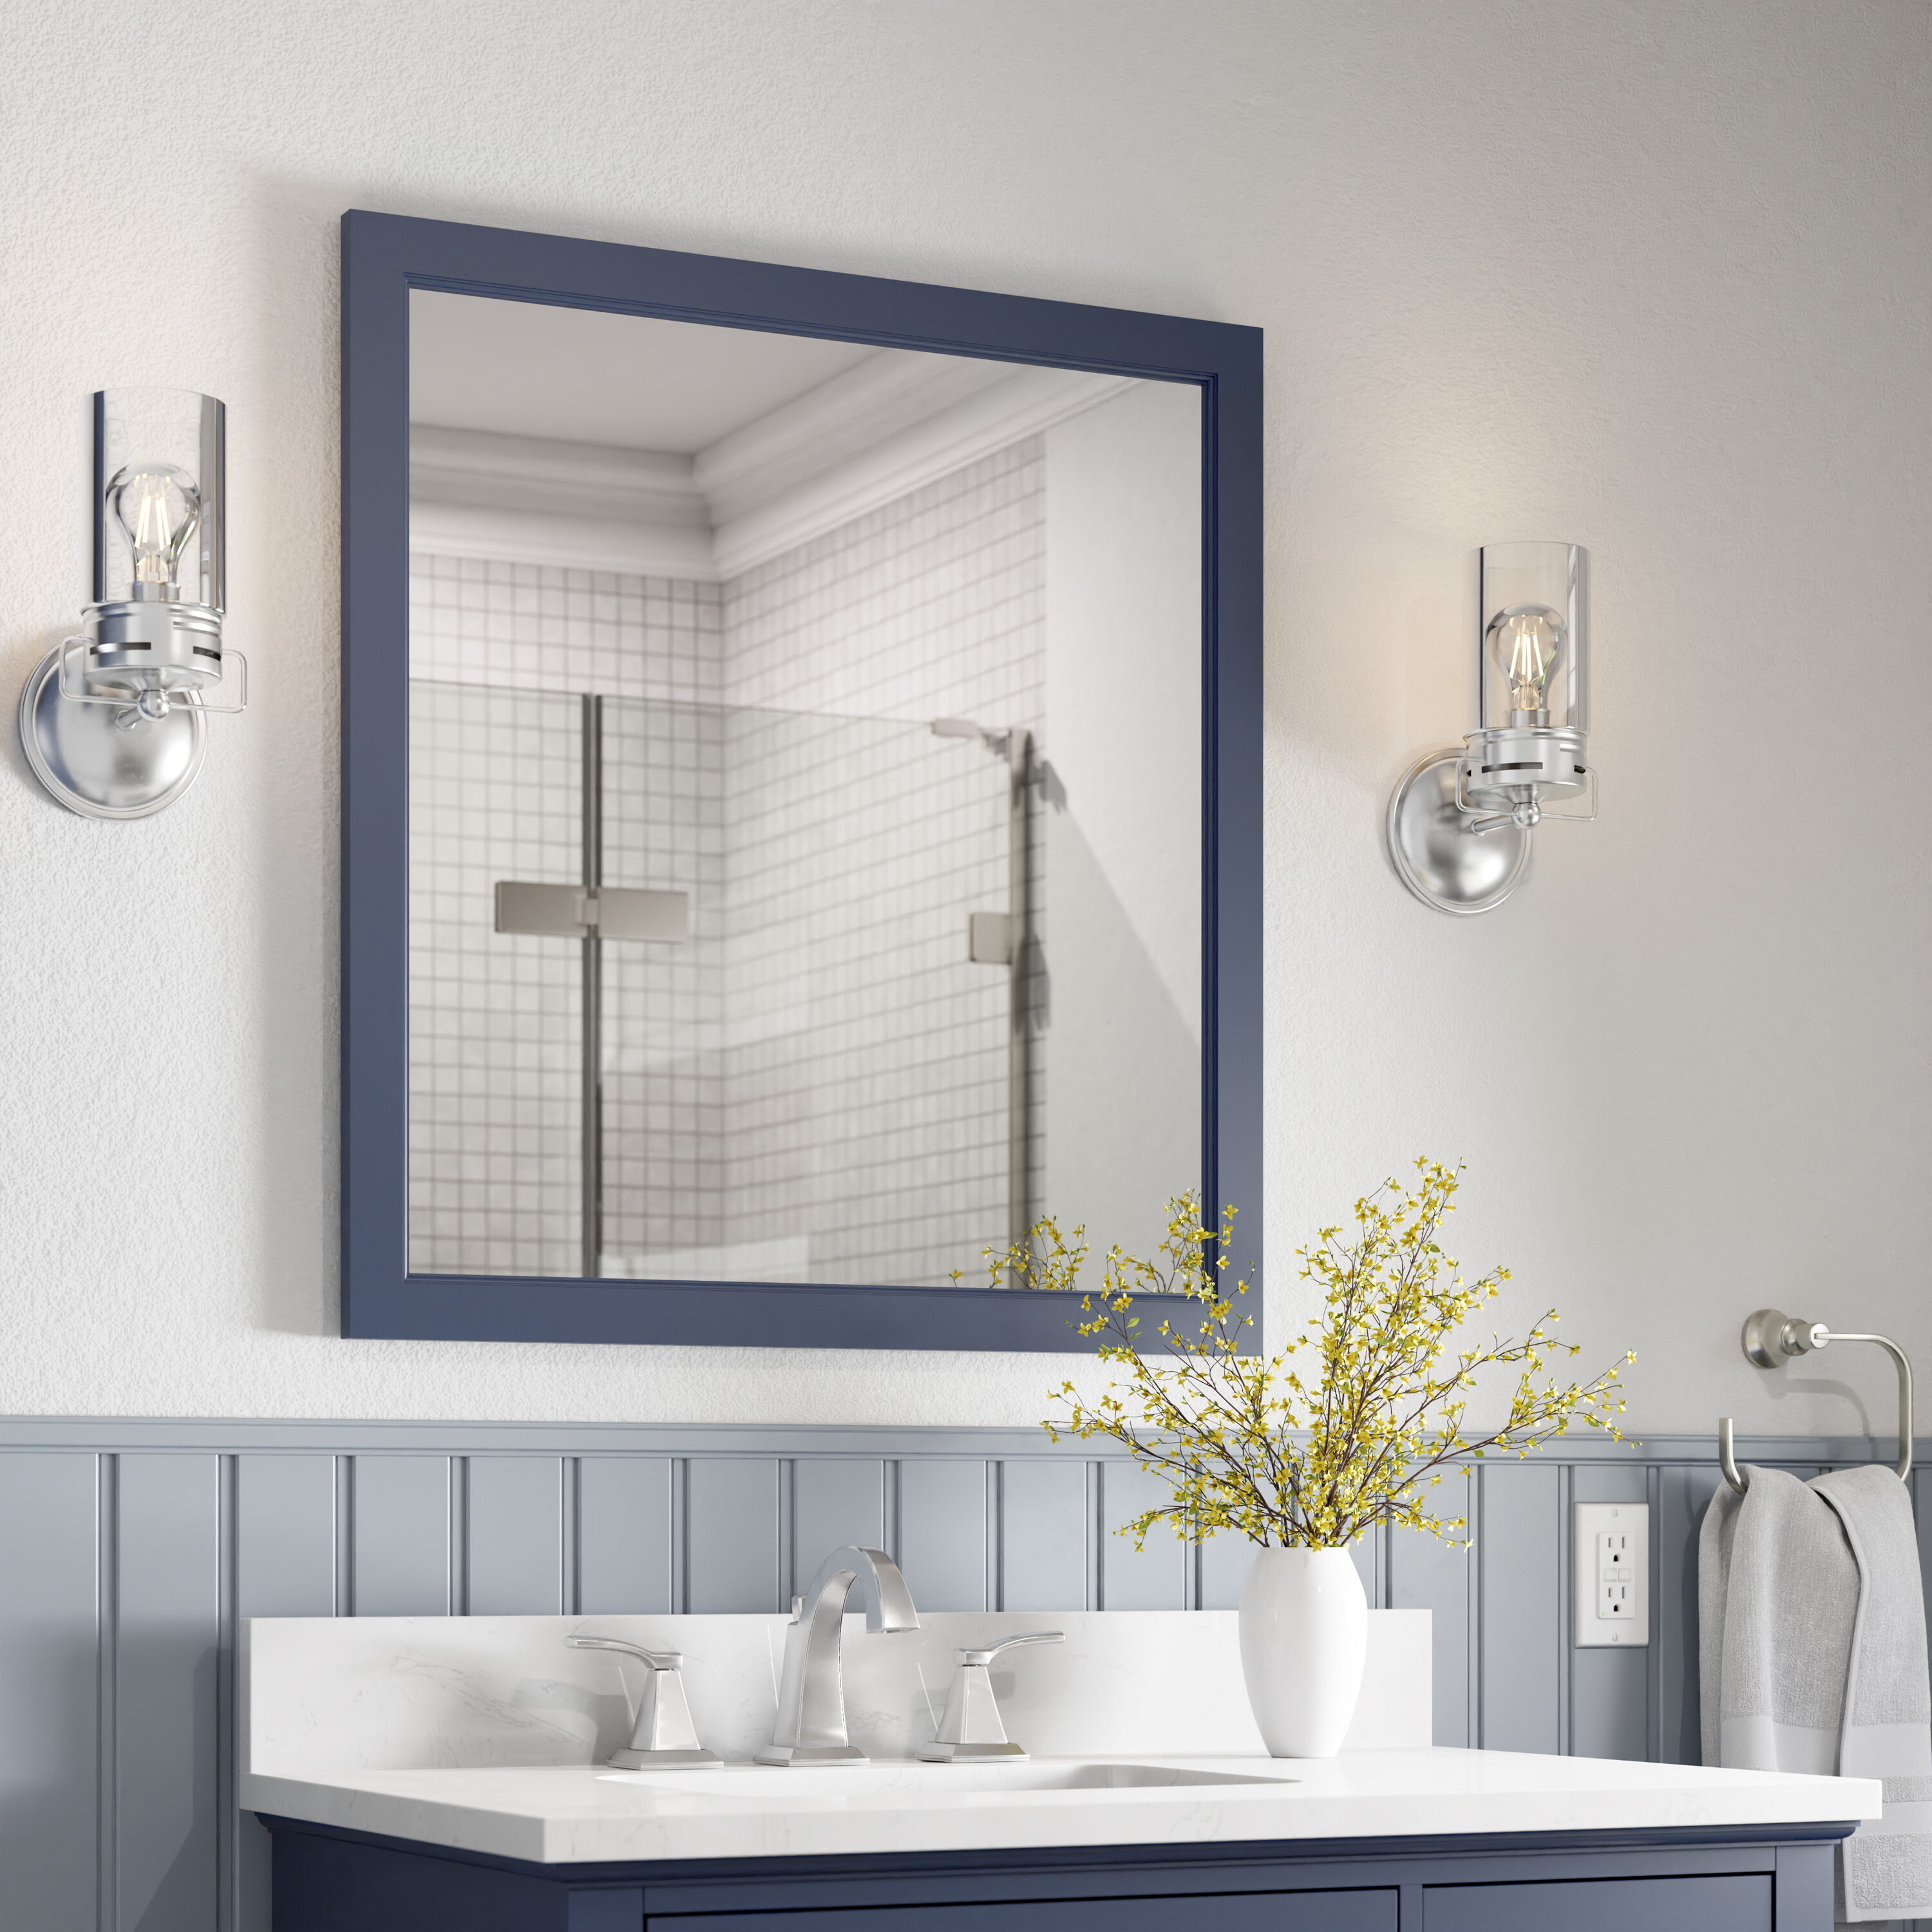 allen + roth Rigsby 32-in x 32-in White Square Framed Bathroom